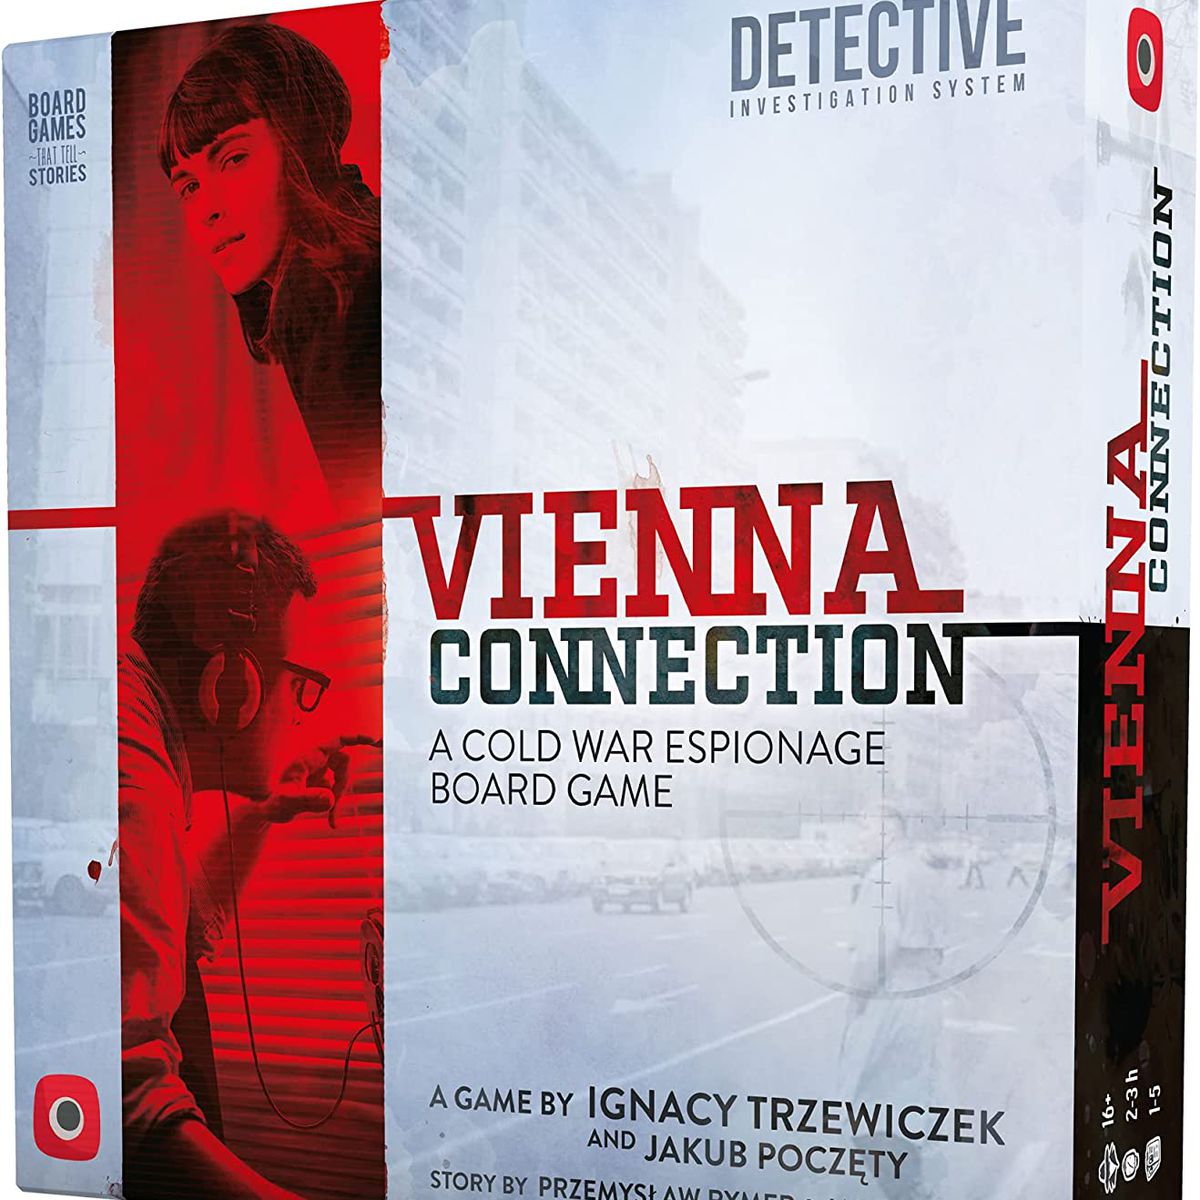 The Vienna Connection box art shows a reticule aiming at a street as cars drive past.